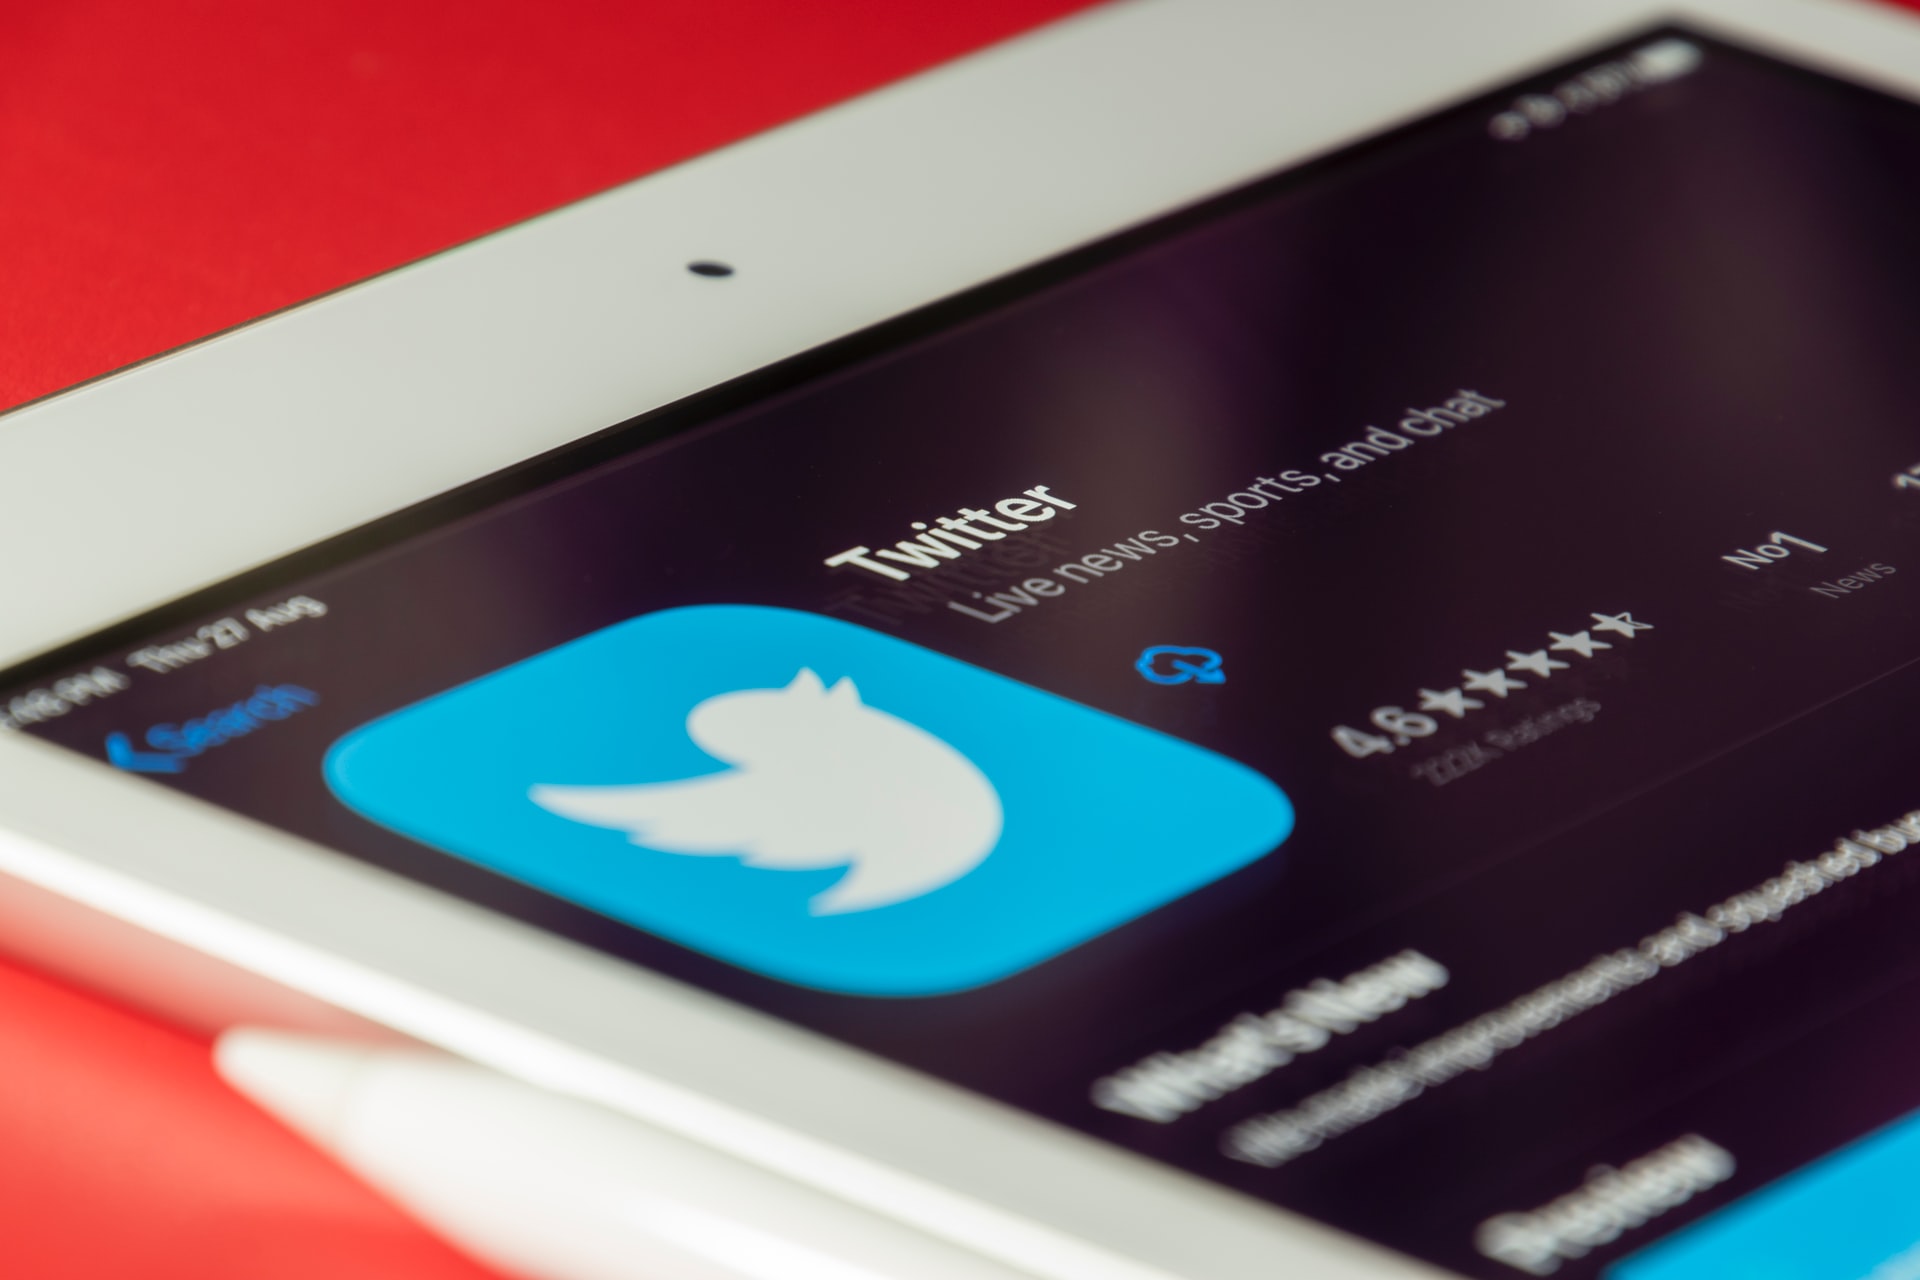 Nigeria lifted its ban on Twitter